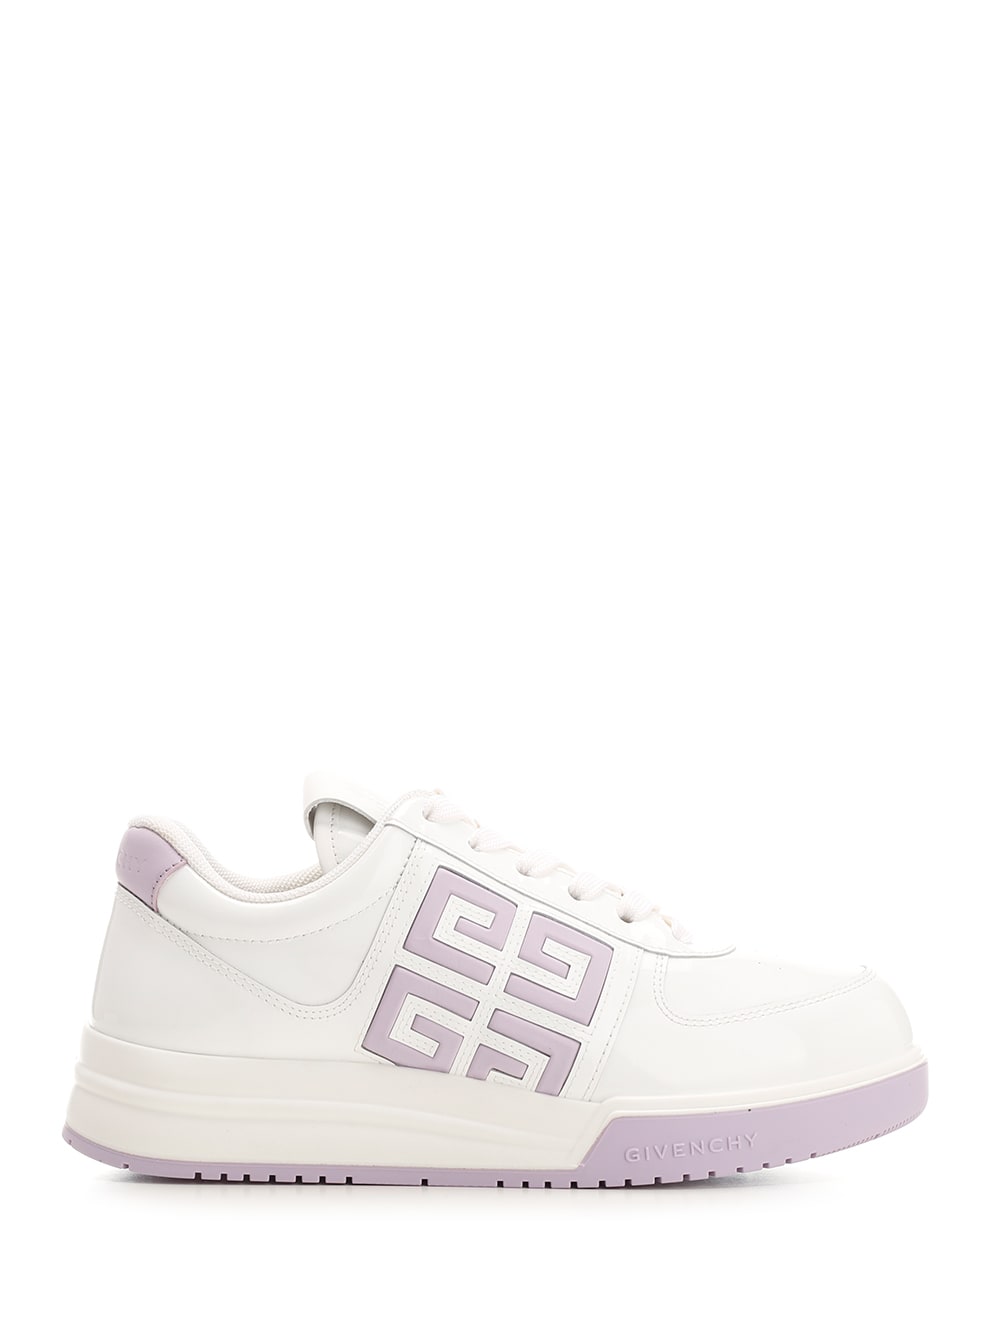 Givenchy 4g Low-top Sneaker In White